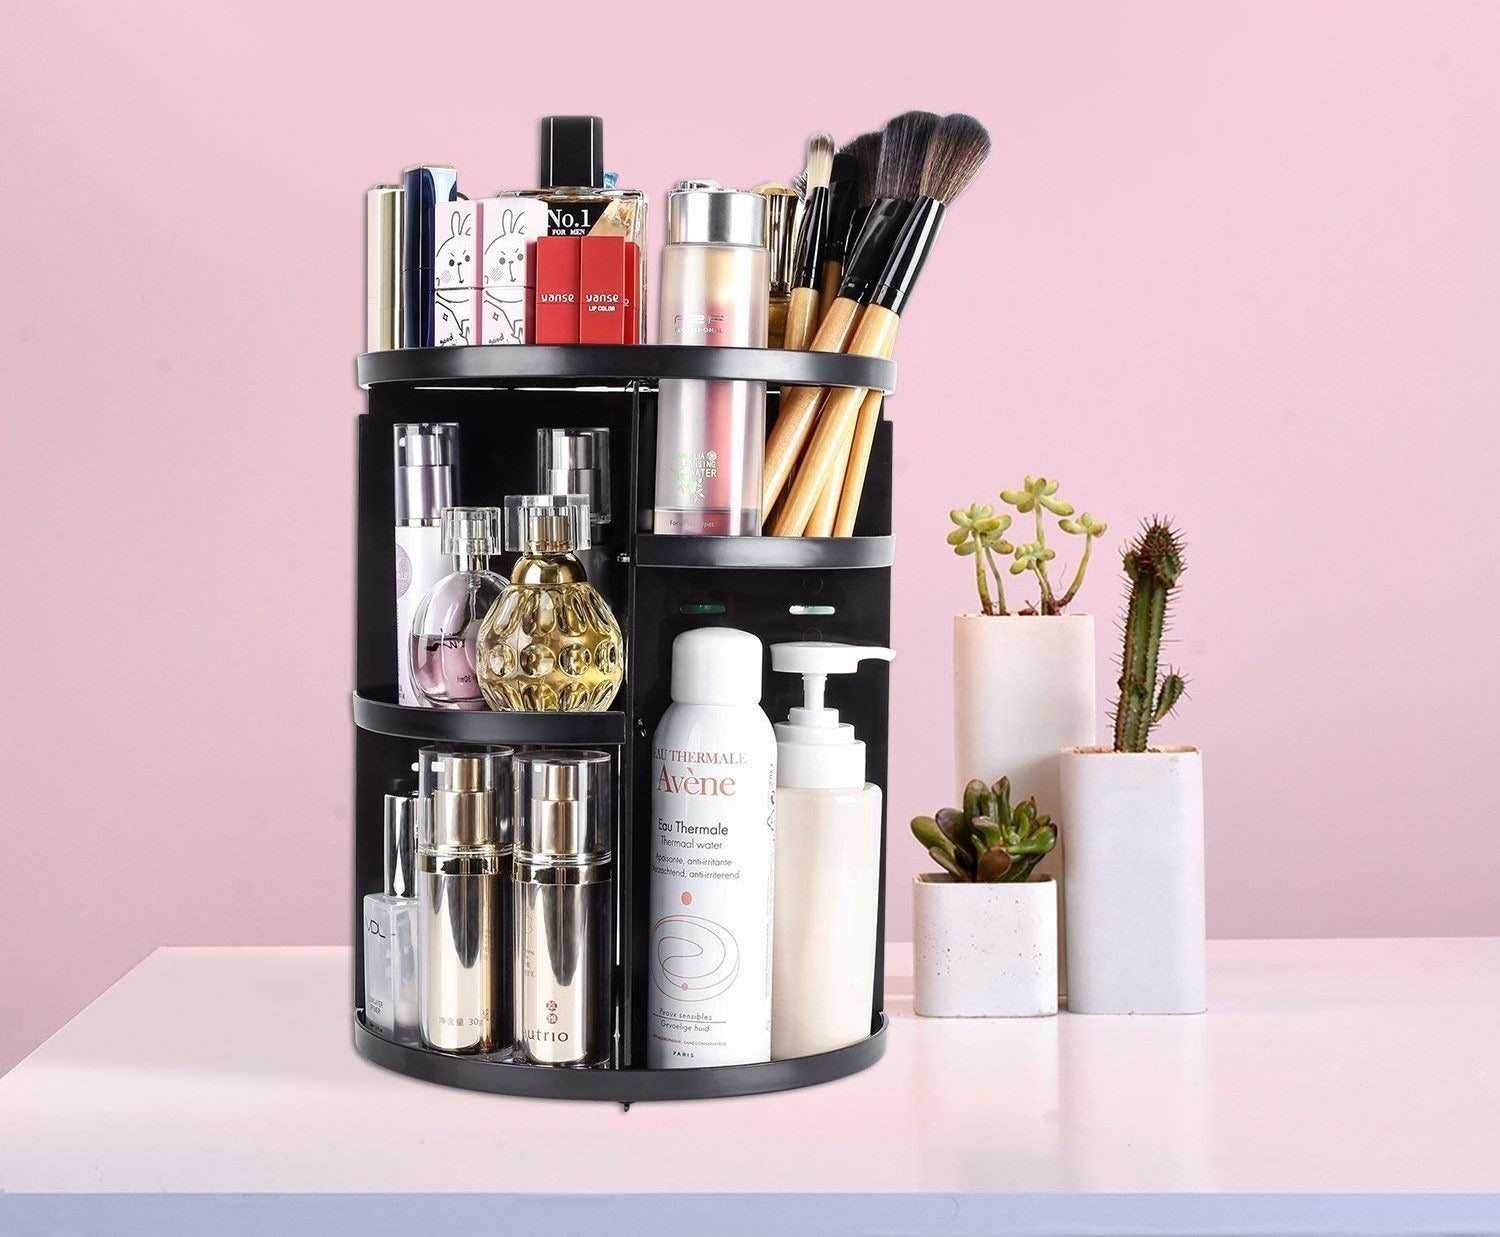 A large cylinder-shaped rack with tons of beauty products stacked on the shelves